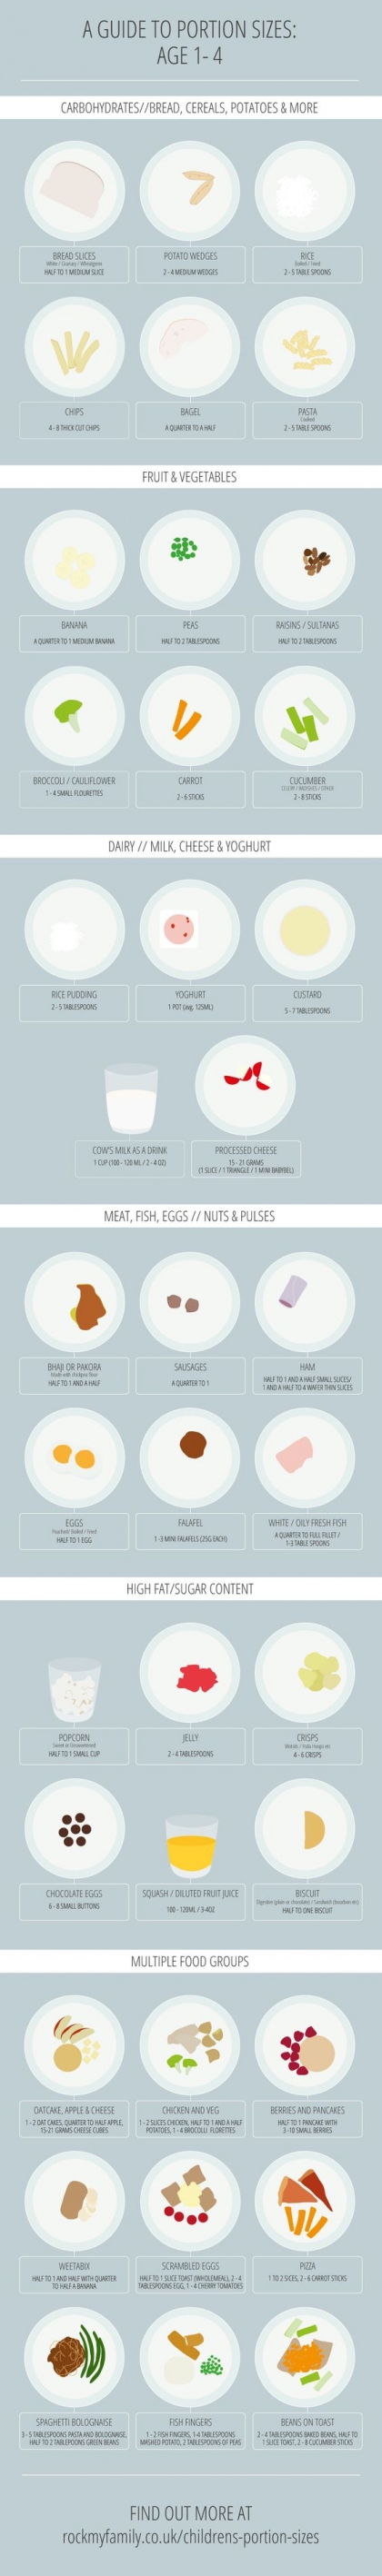 Portion Size Chart For Adults